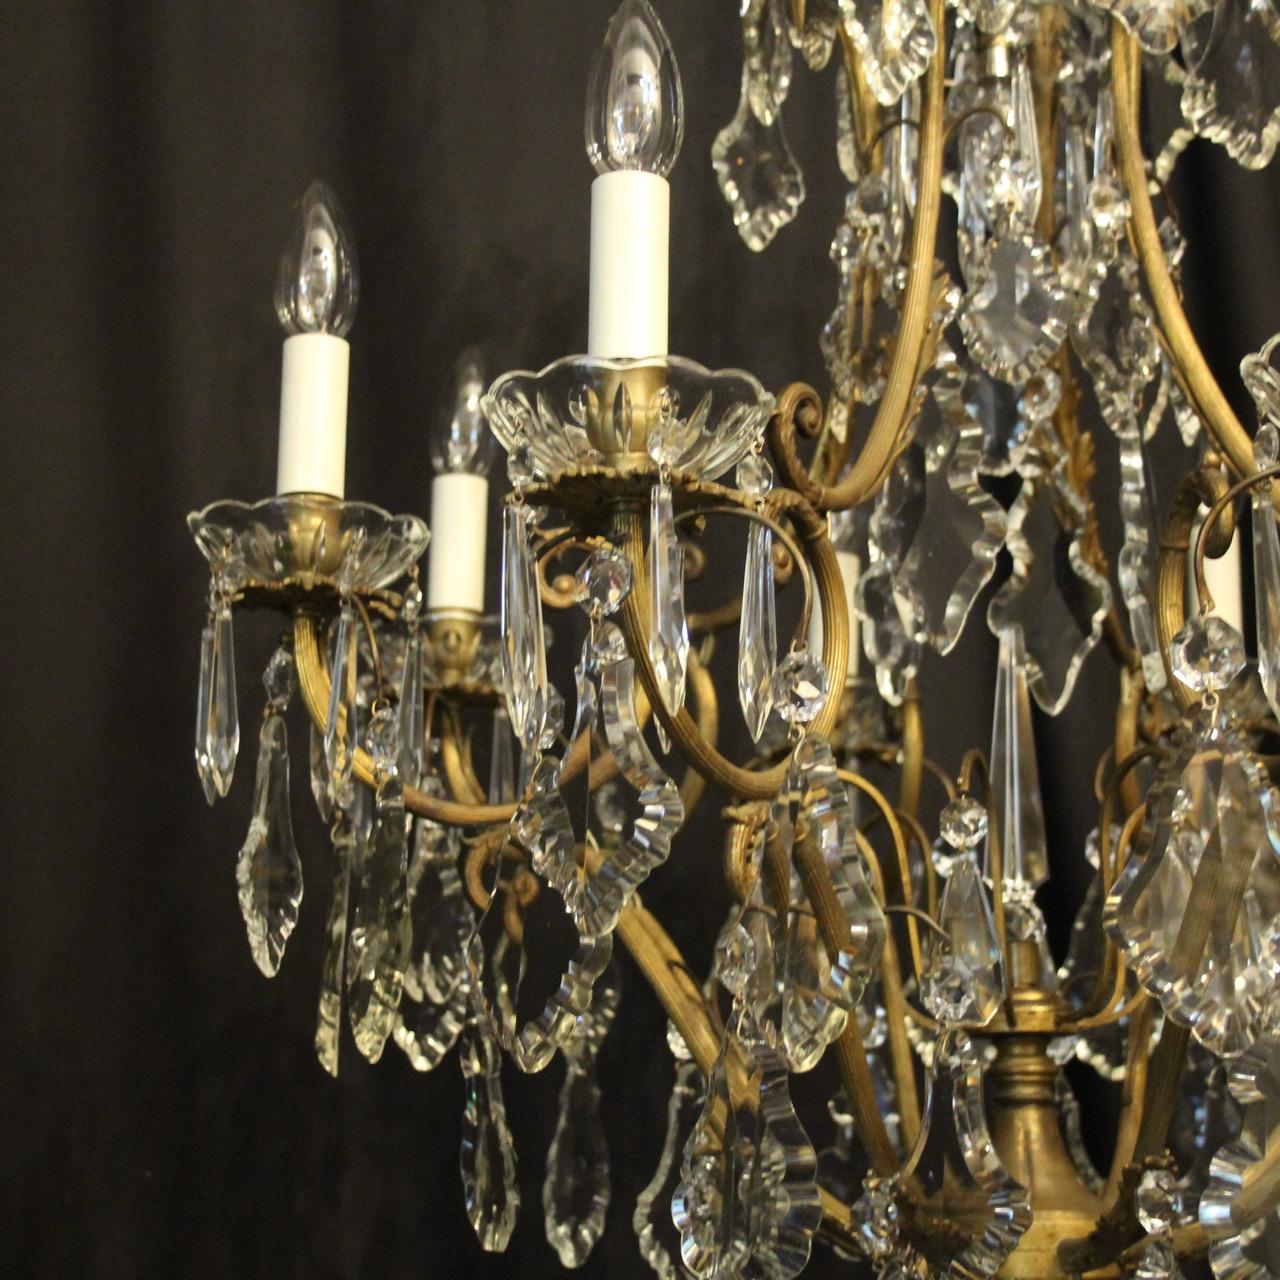 Baroque Revival French, 19th Century Gilded and Crystal 9-Light Antique Chandelier For Sale